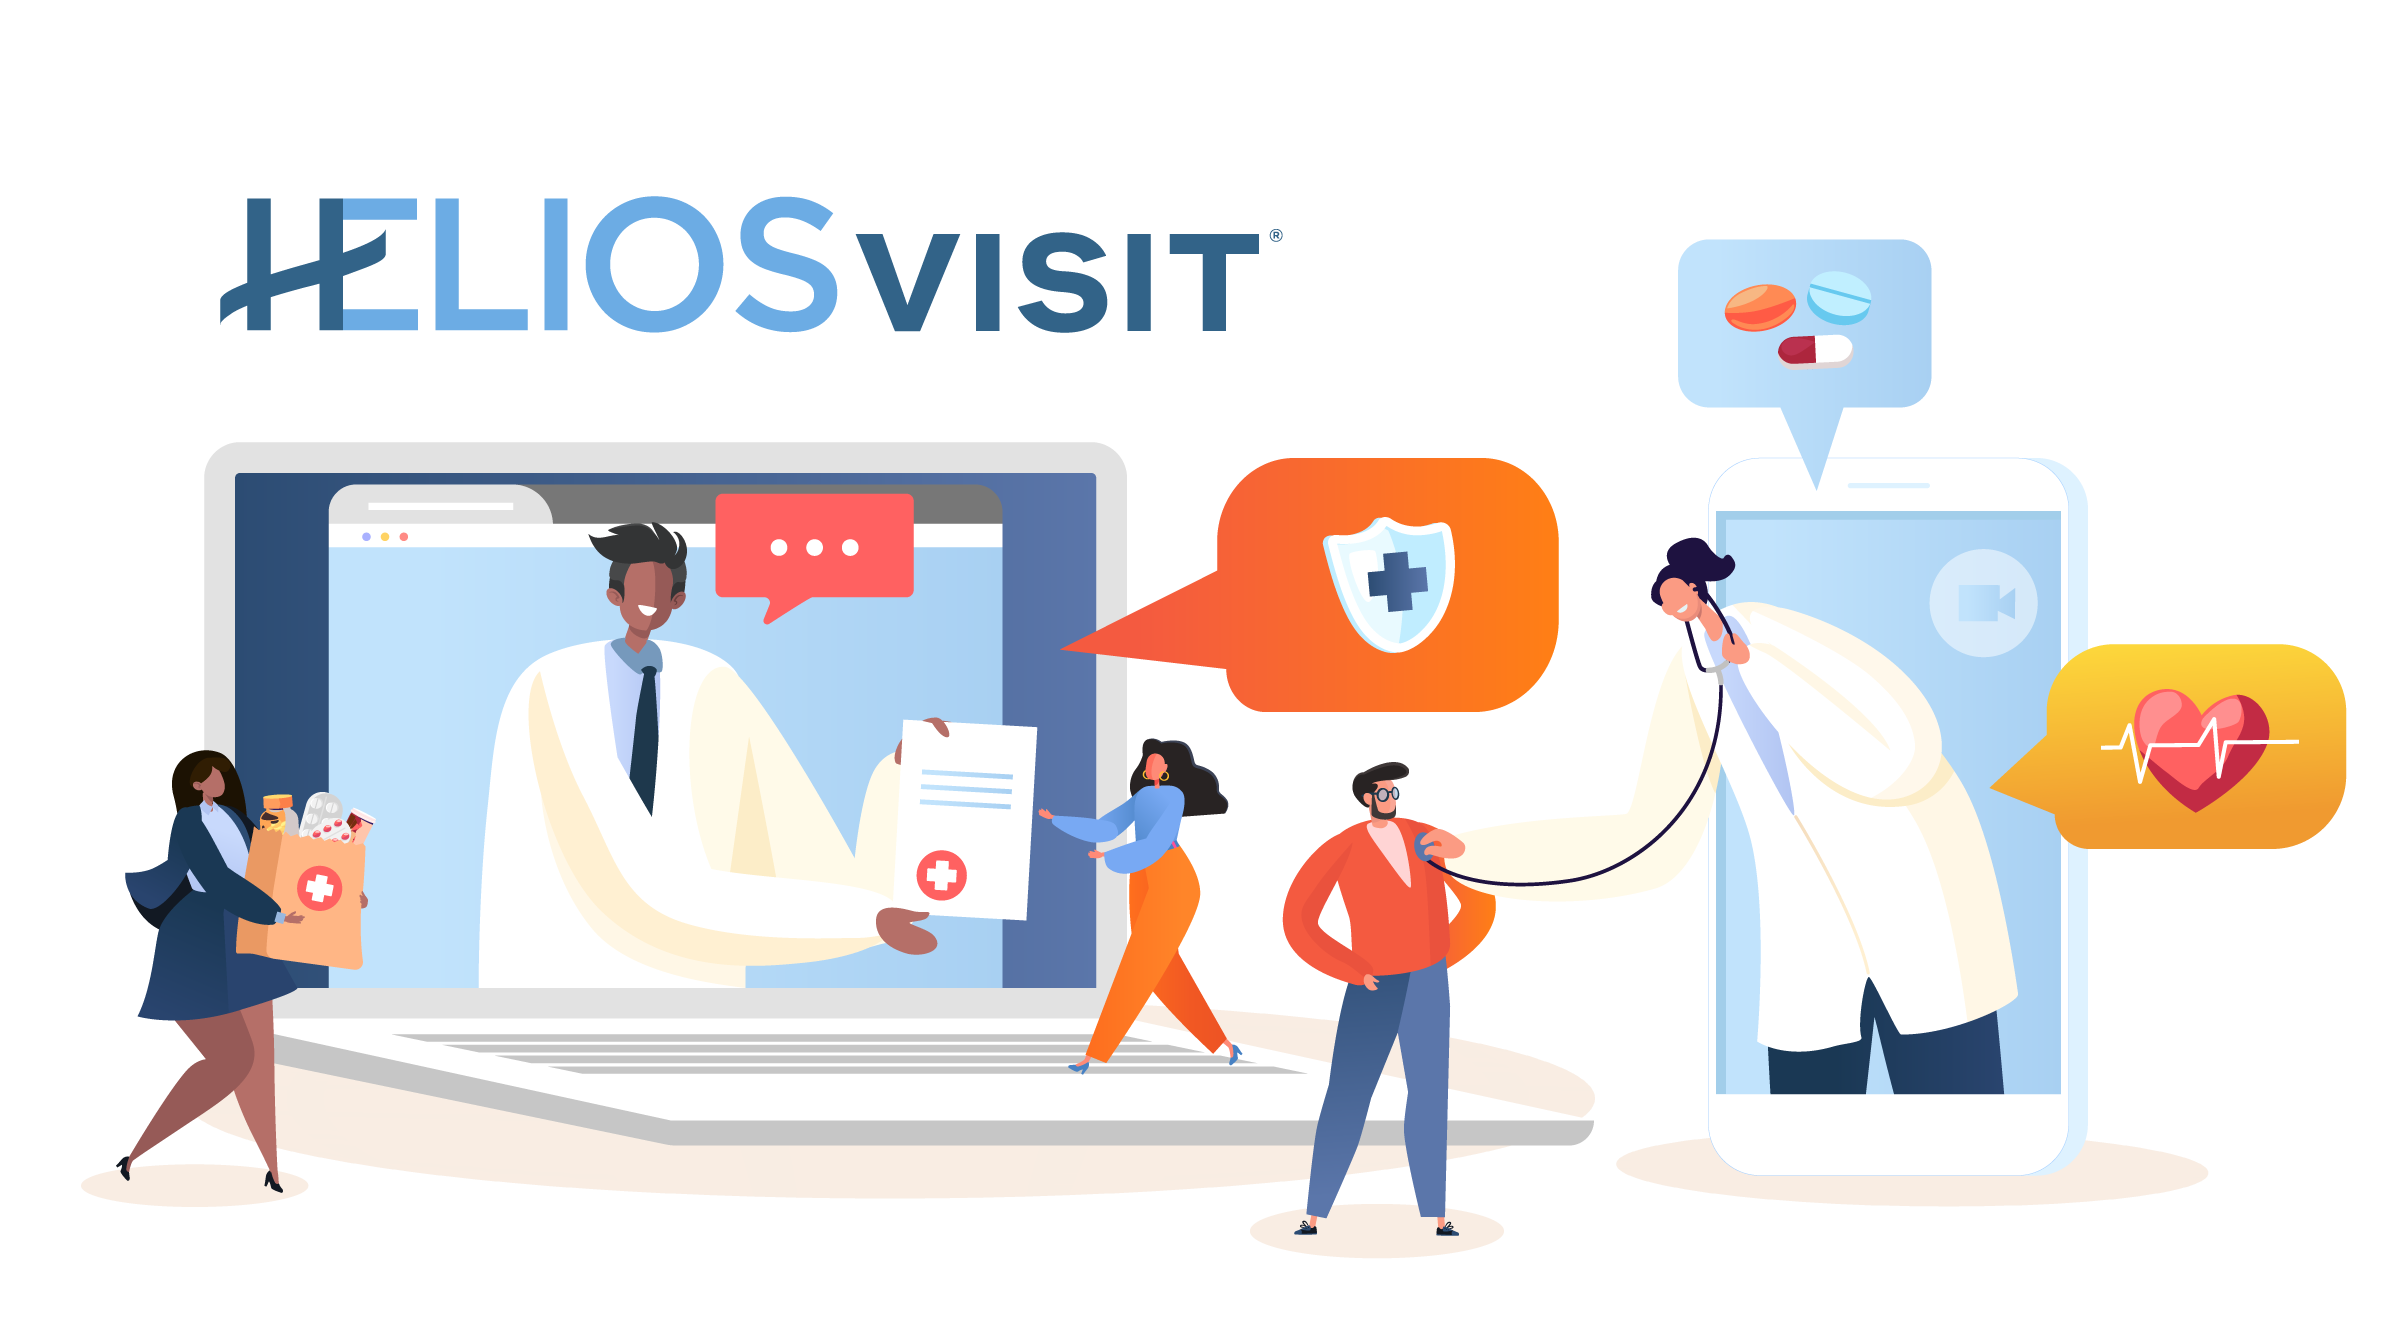 An illustration of healthcare technology for HeliosVisit